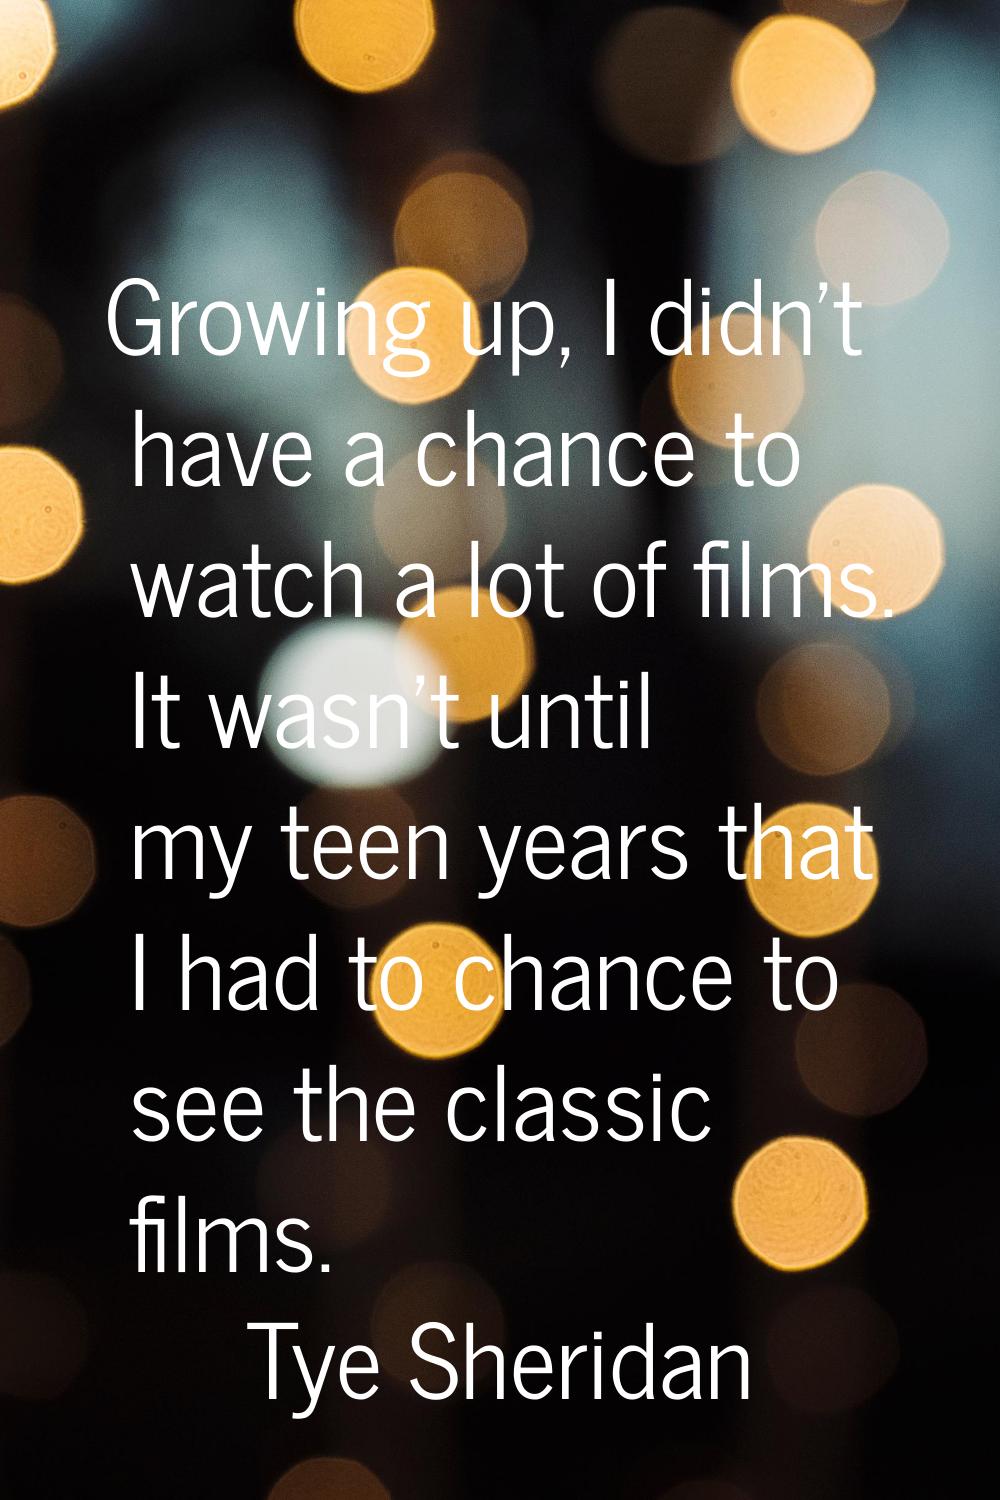 Growing up, I didn't have a chance to watch a lot of films. It wasn't until my teen years that I ha